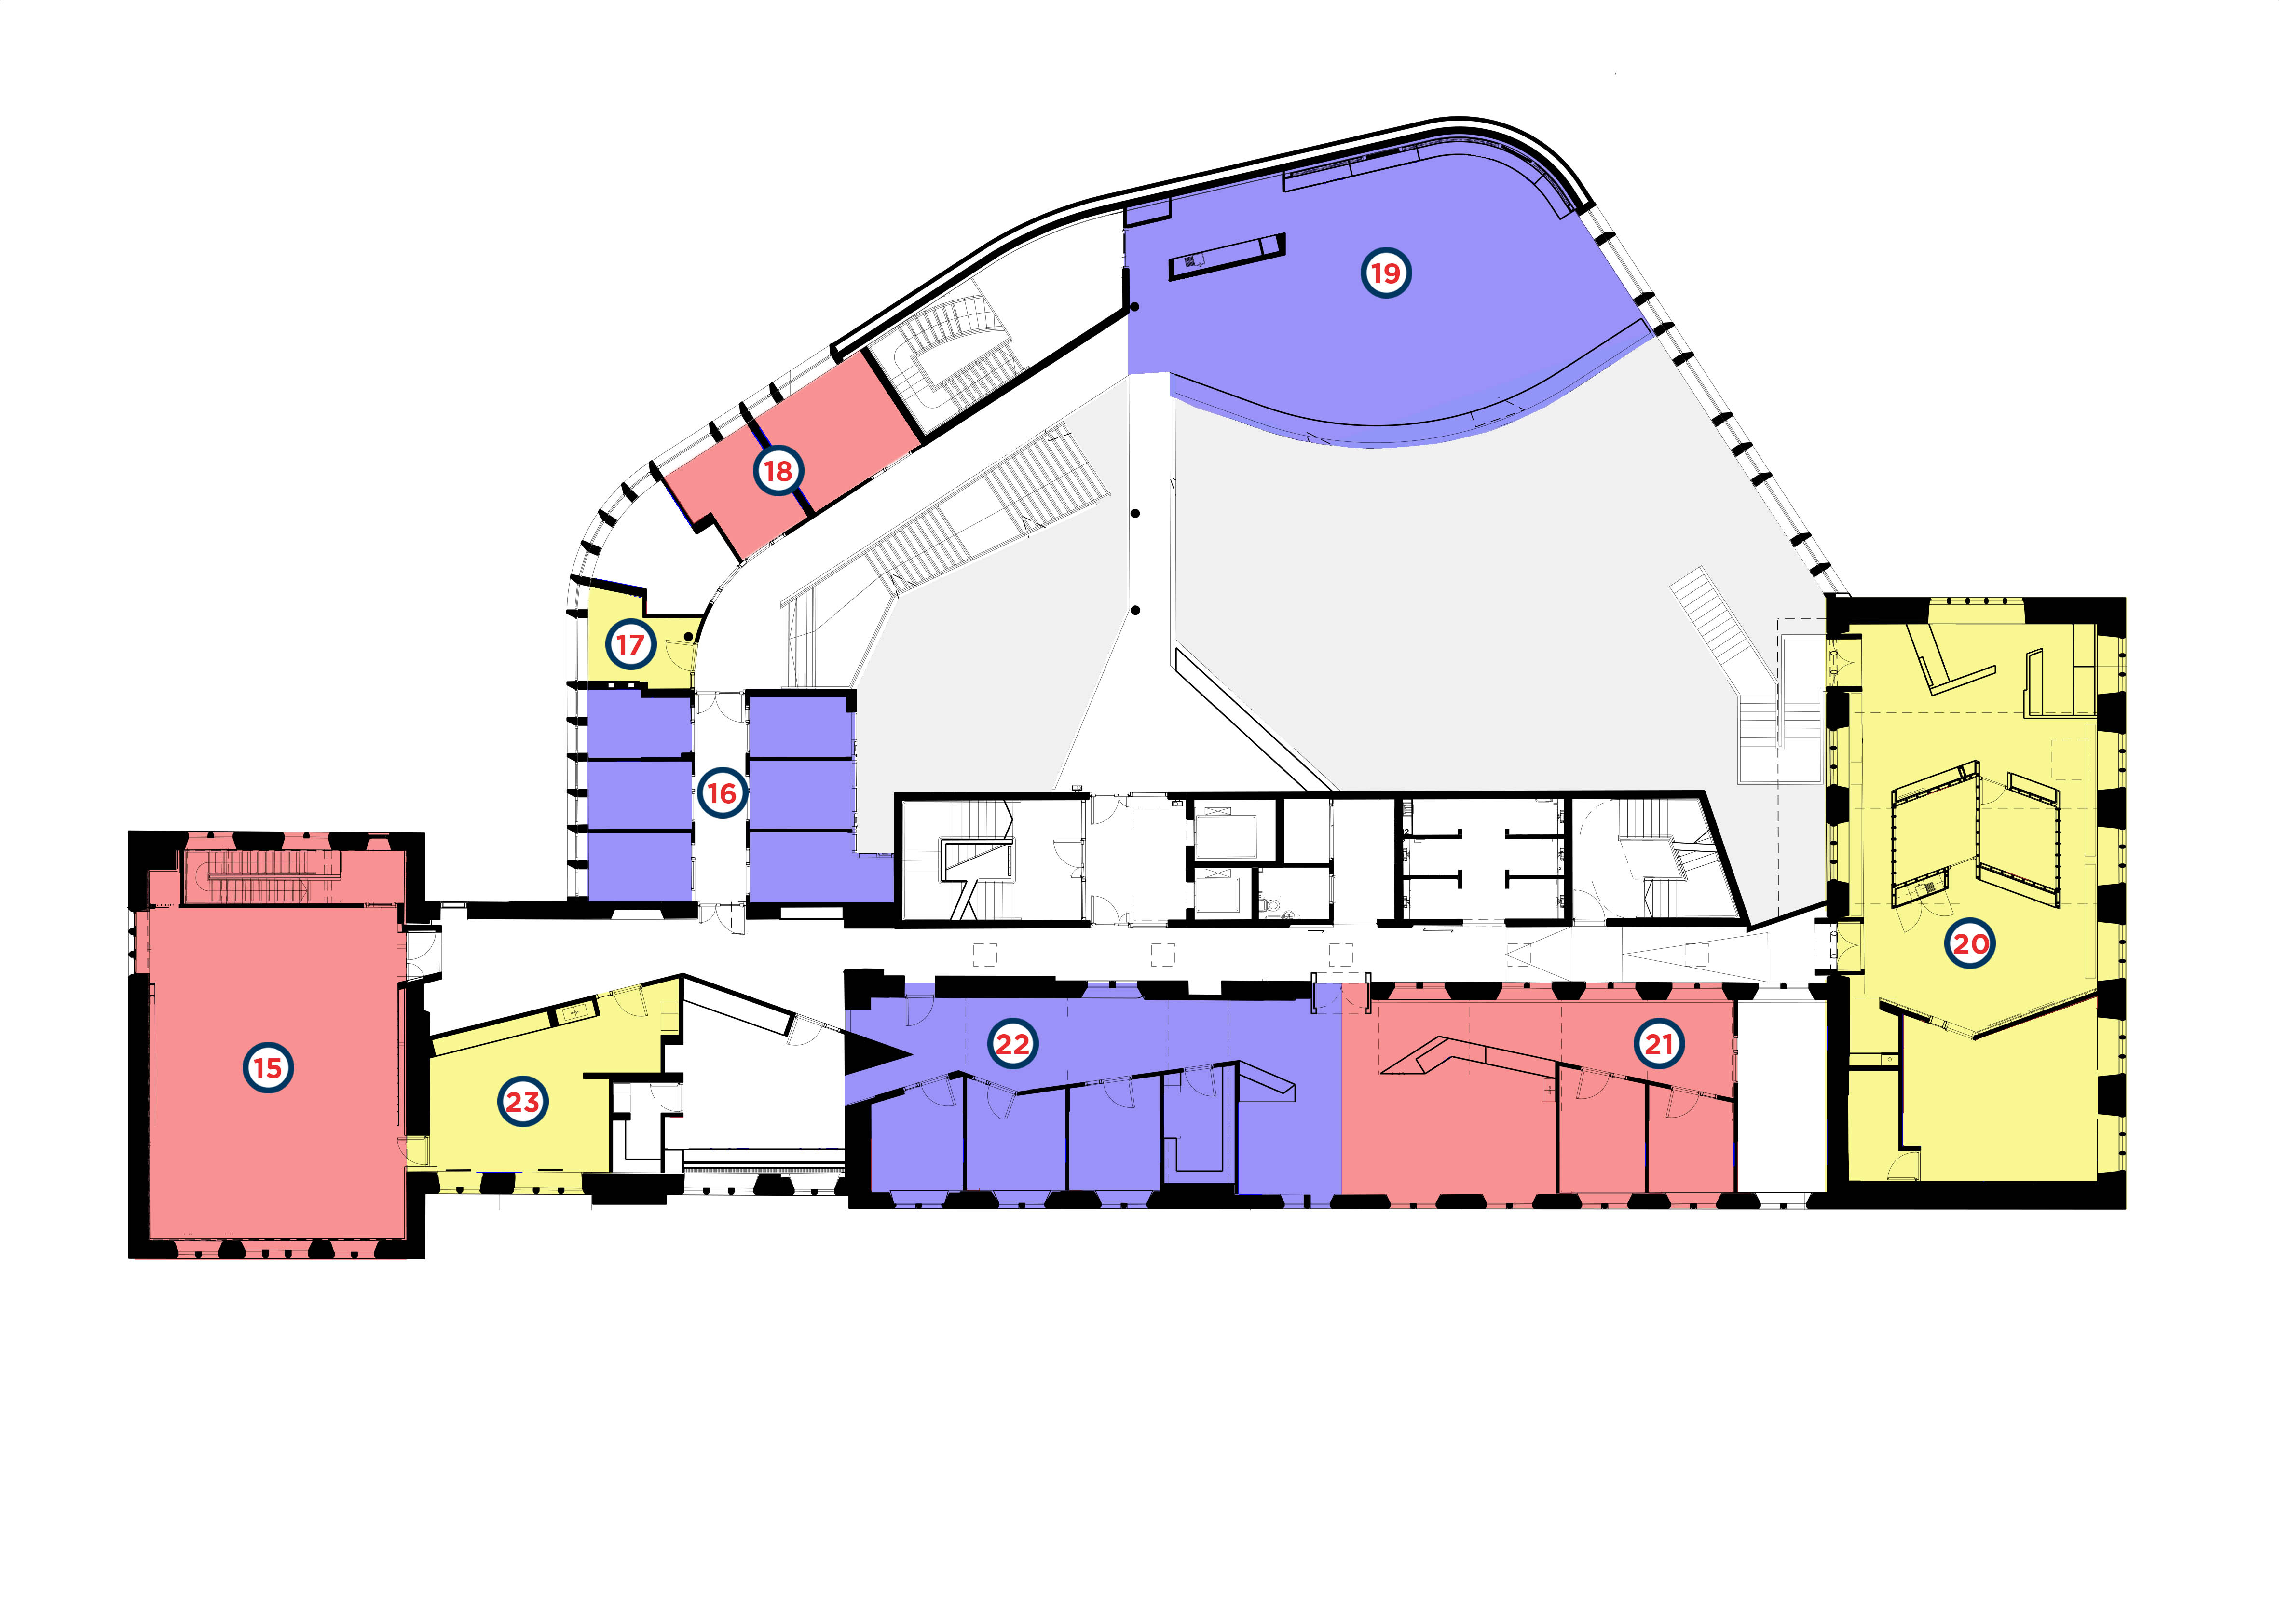 Layout floor plan of the First Floor of the Hub